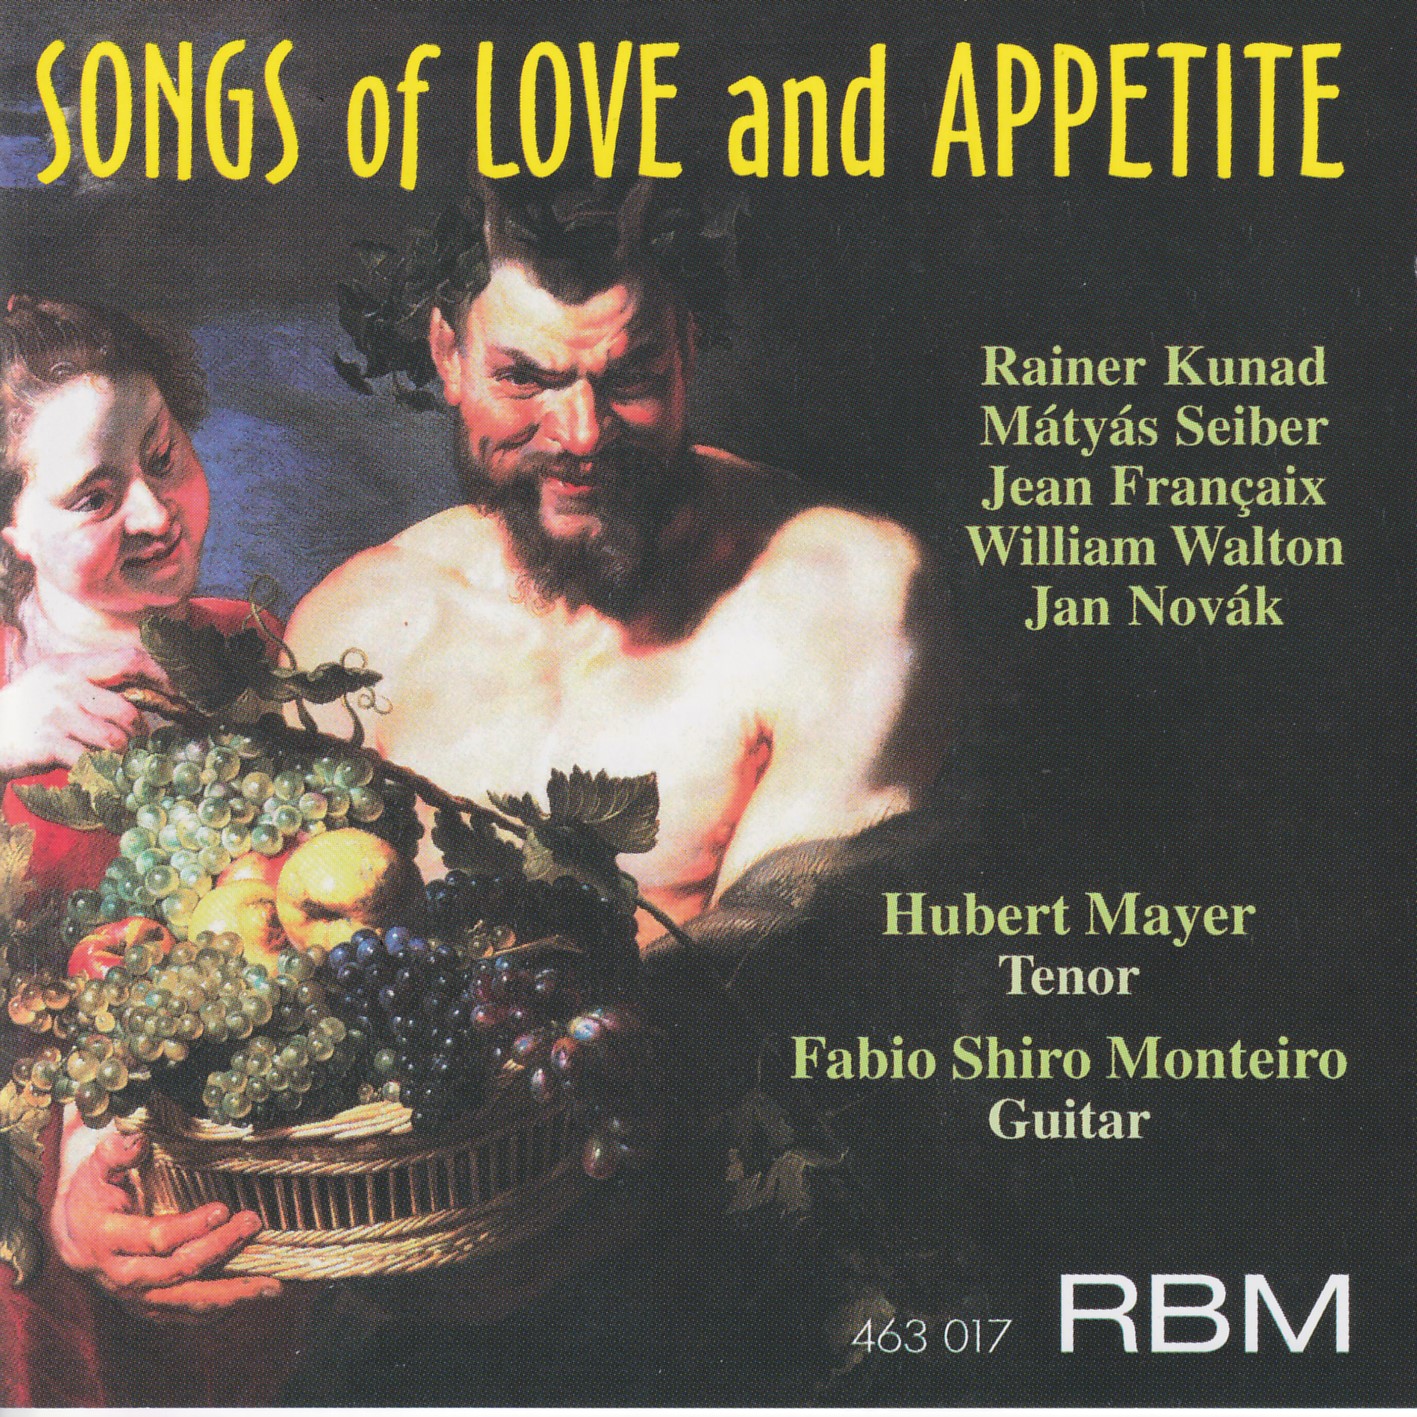 SONGS of LOVE and APPETITE